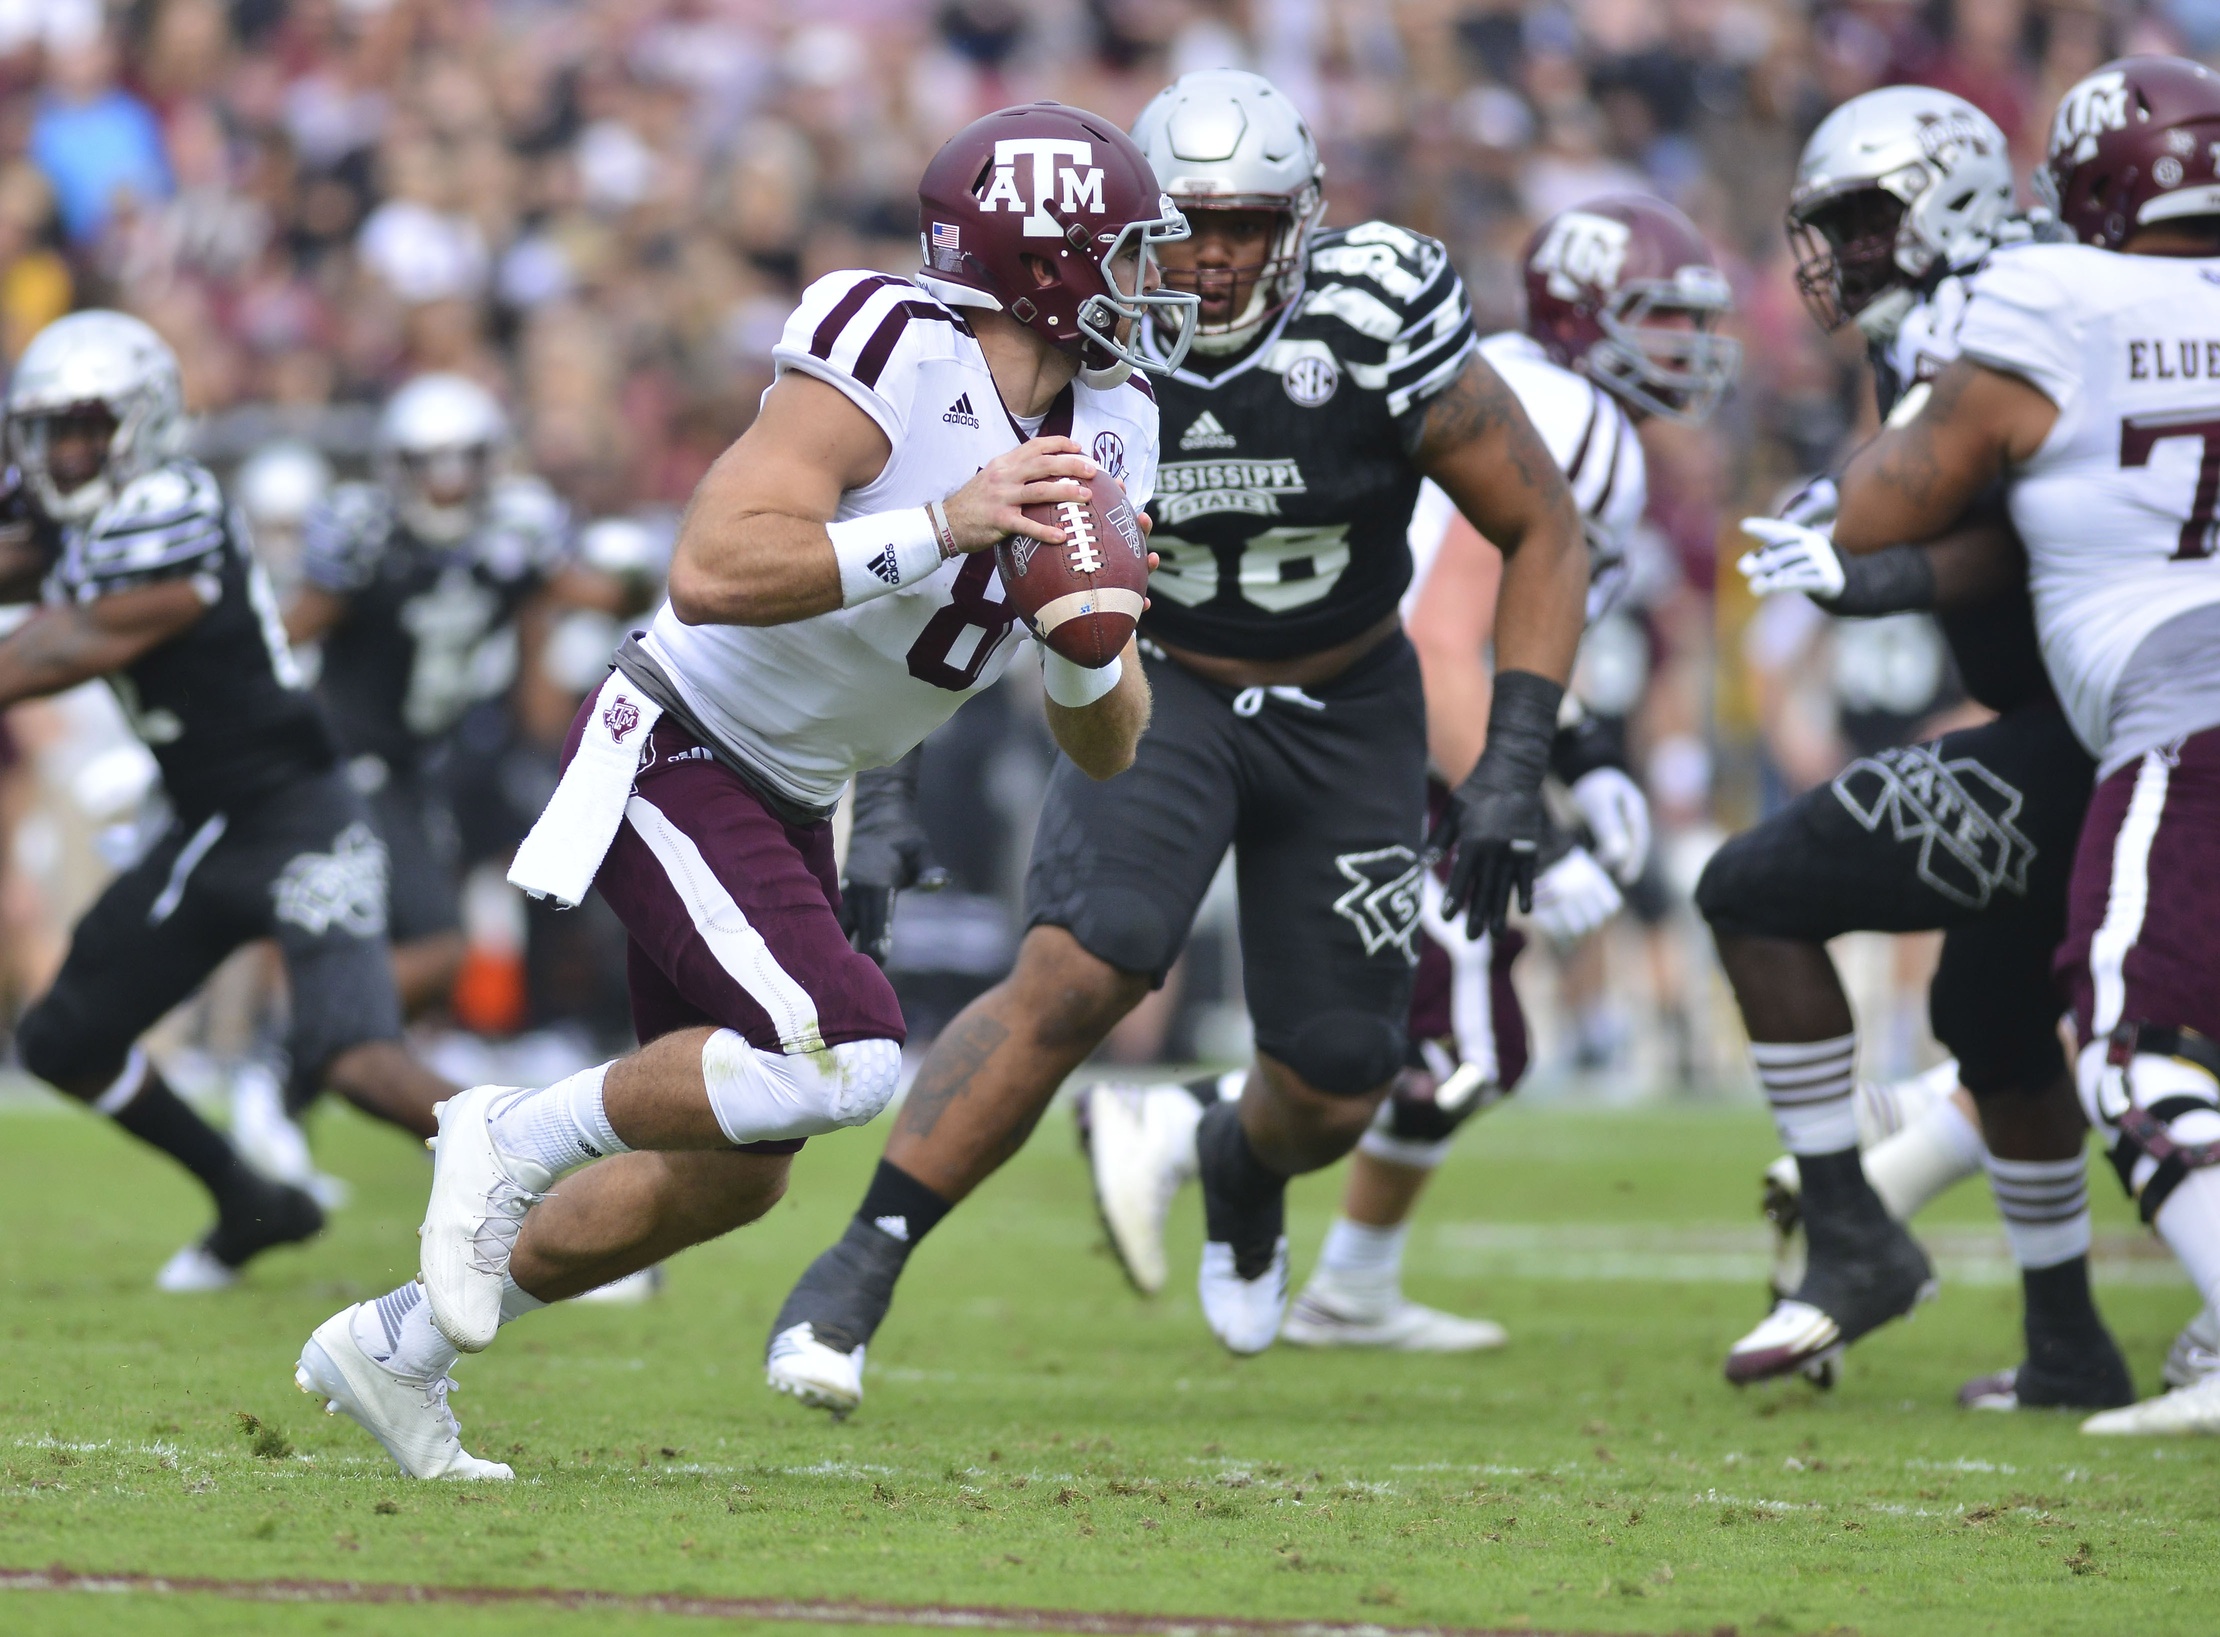 Nov 5, 2016; Starkville, MS, USA; Texas A&M Aggies quarterback Trevor Knight (8) moves in the pocket during the first quarter against the Mississippi State Bulldogs at Davis Wade Stadium. Mandatory Credit: Matt Bush-USA TODAY Sports